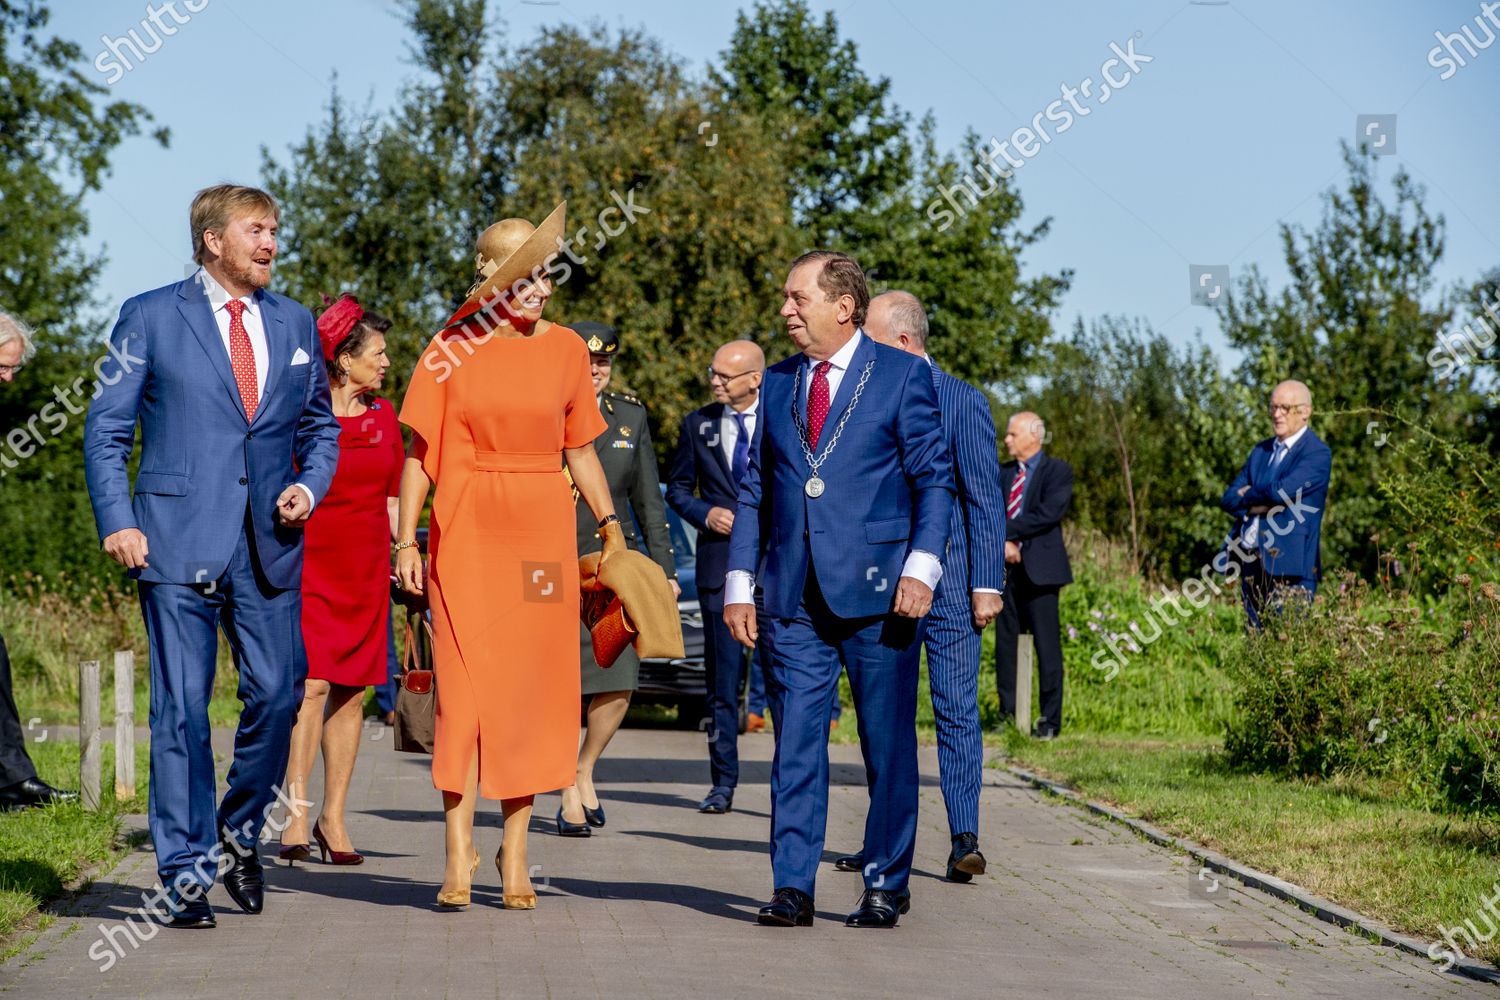 king-willem-alexander-and-queen-maxima-visit-to-ooststellingwerf-the-netherlands-shutterstock-editorial-10779750cd.jpg